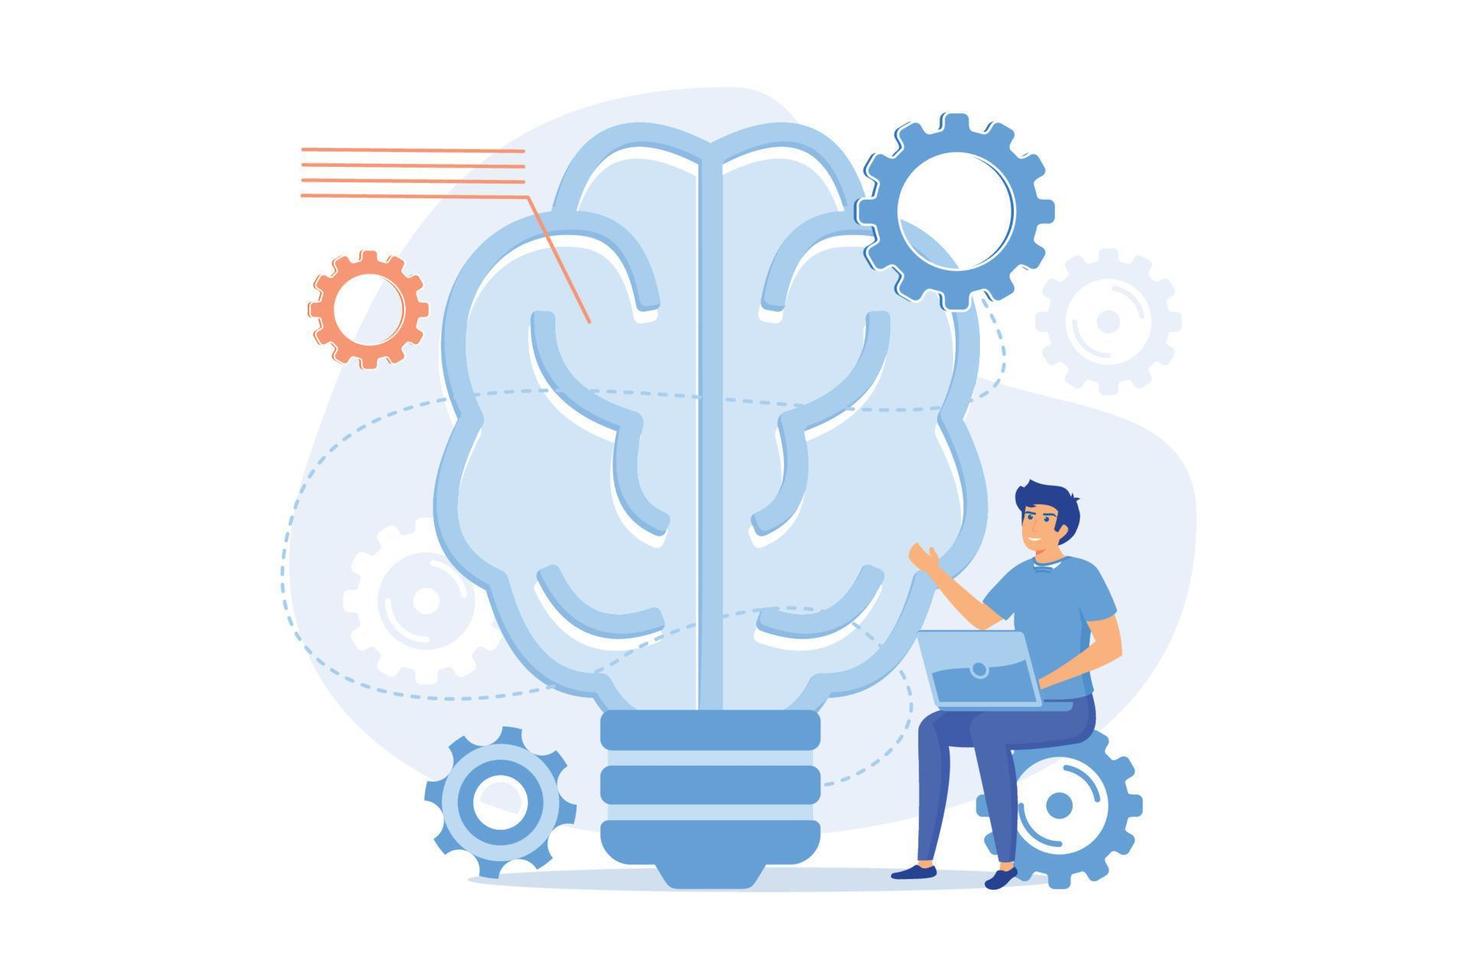 Human brain with gears thinking and users. Creating ideas and thoughts, brainstorming, creativity and business ideas, thinking and invention concept vector